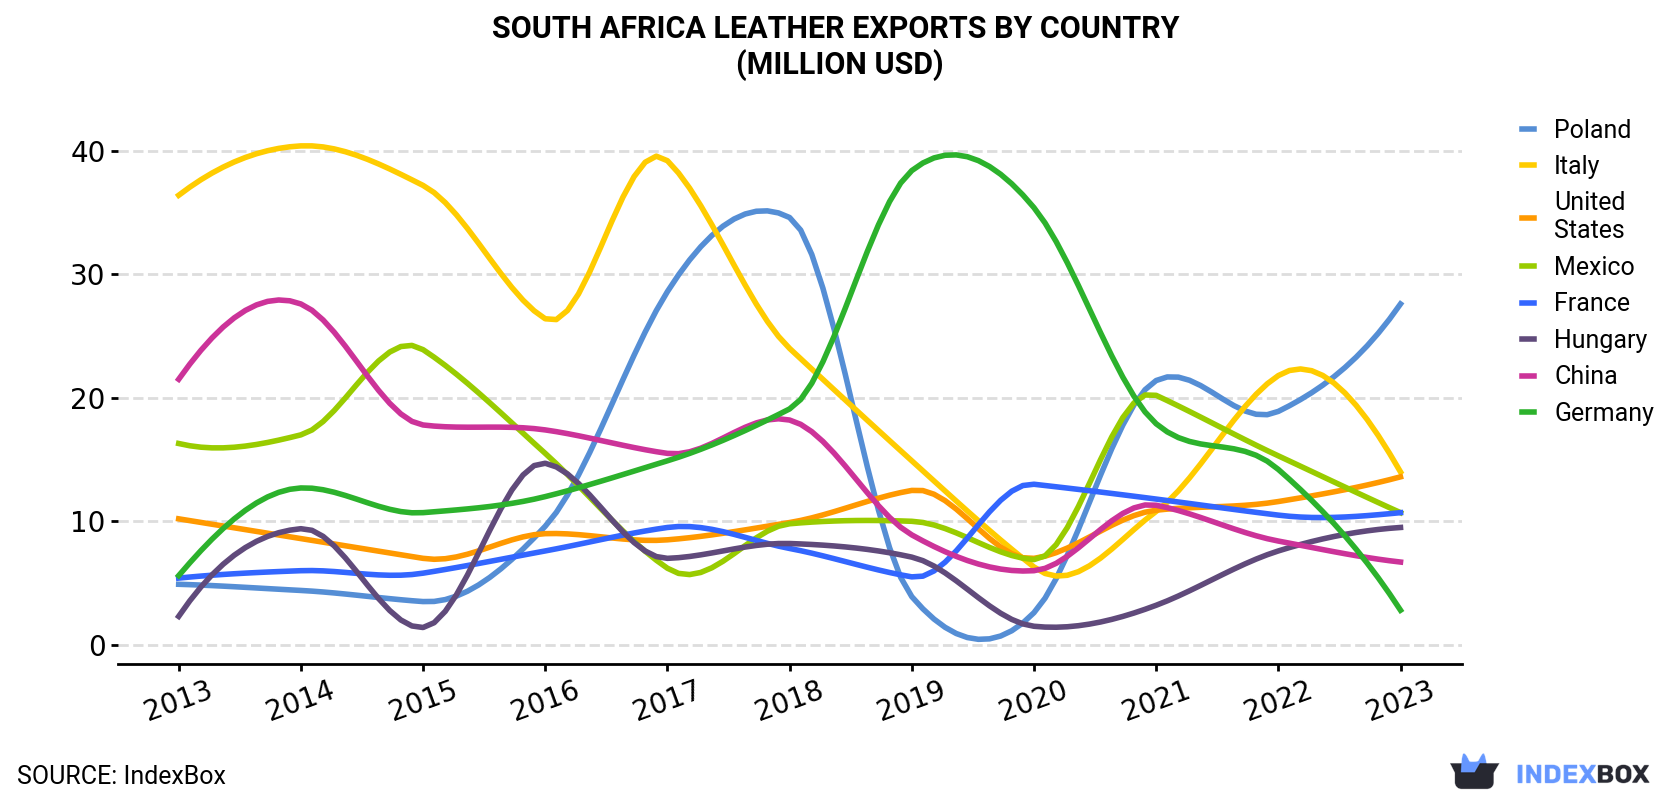 South Africa Leather Exports By Country (Million USD)